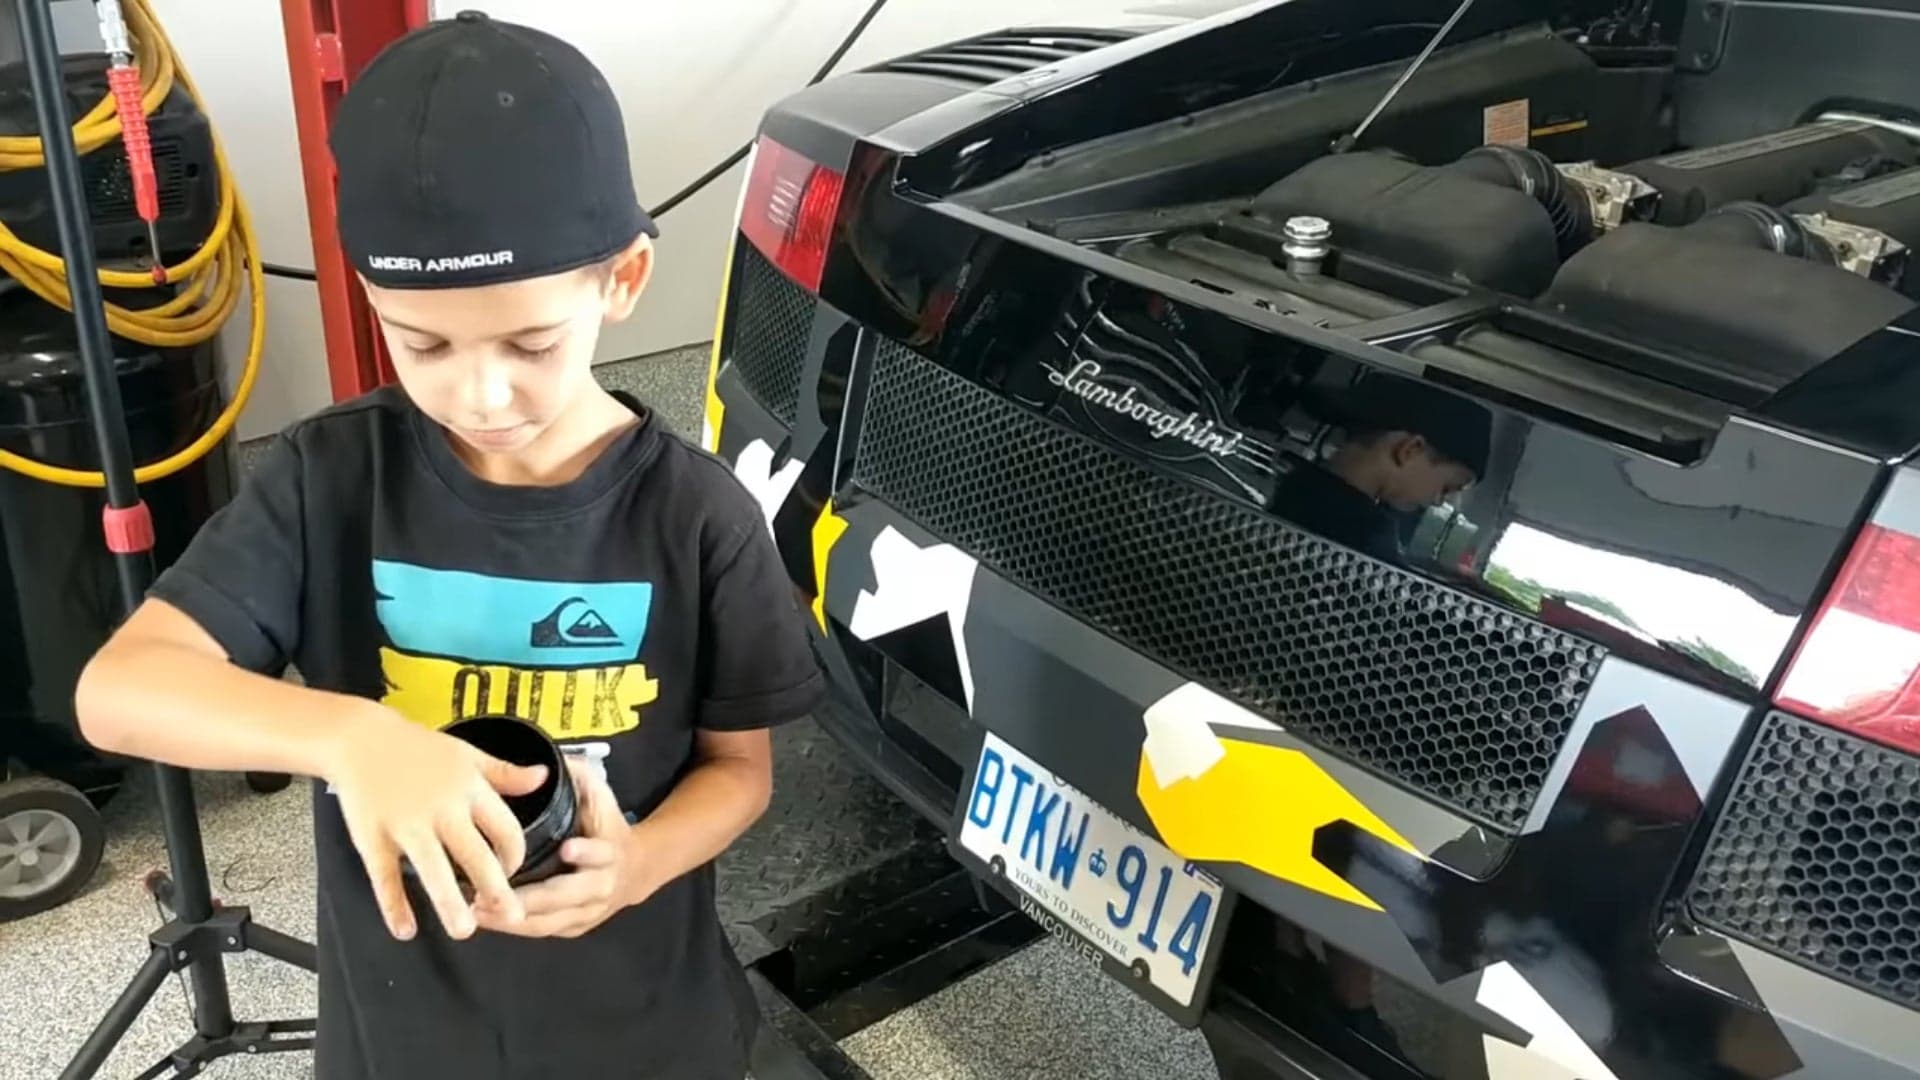 If A 5 Year-Old Can Change A Lambo’s Oil, So Can You